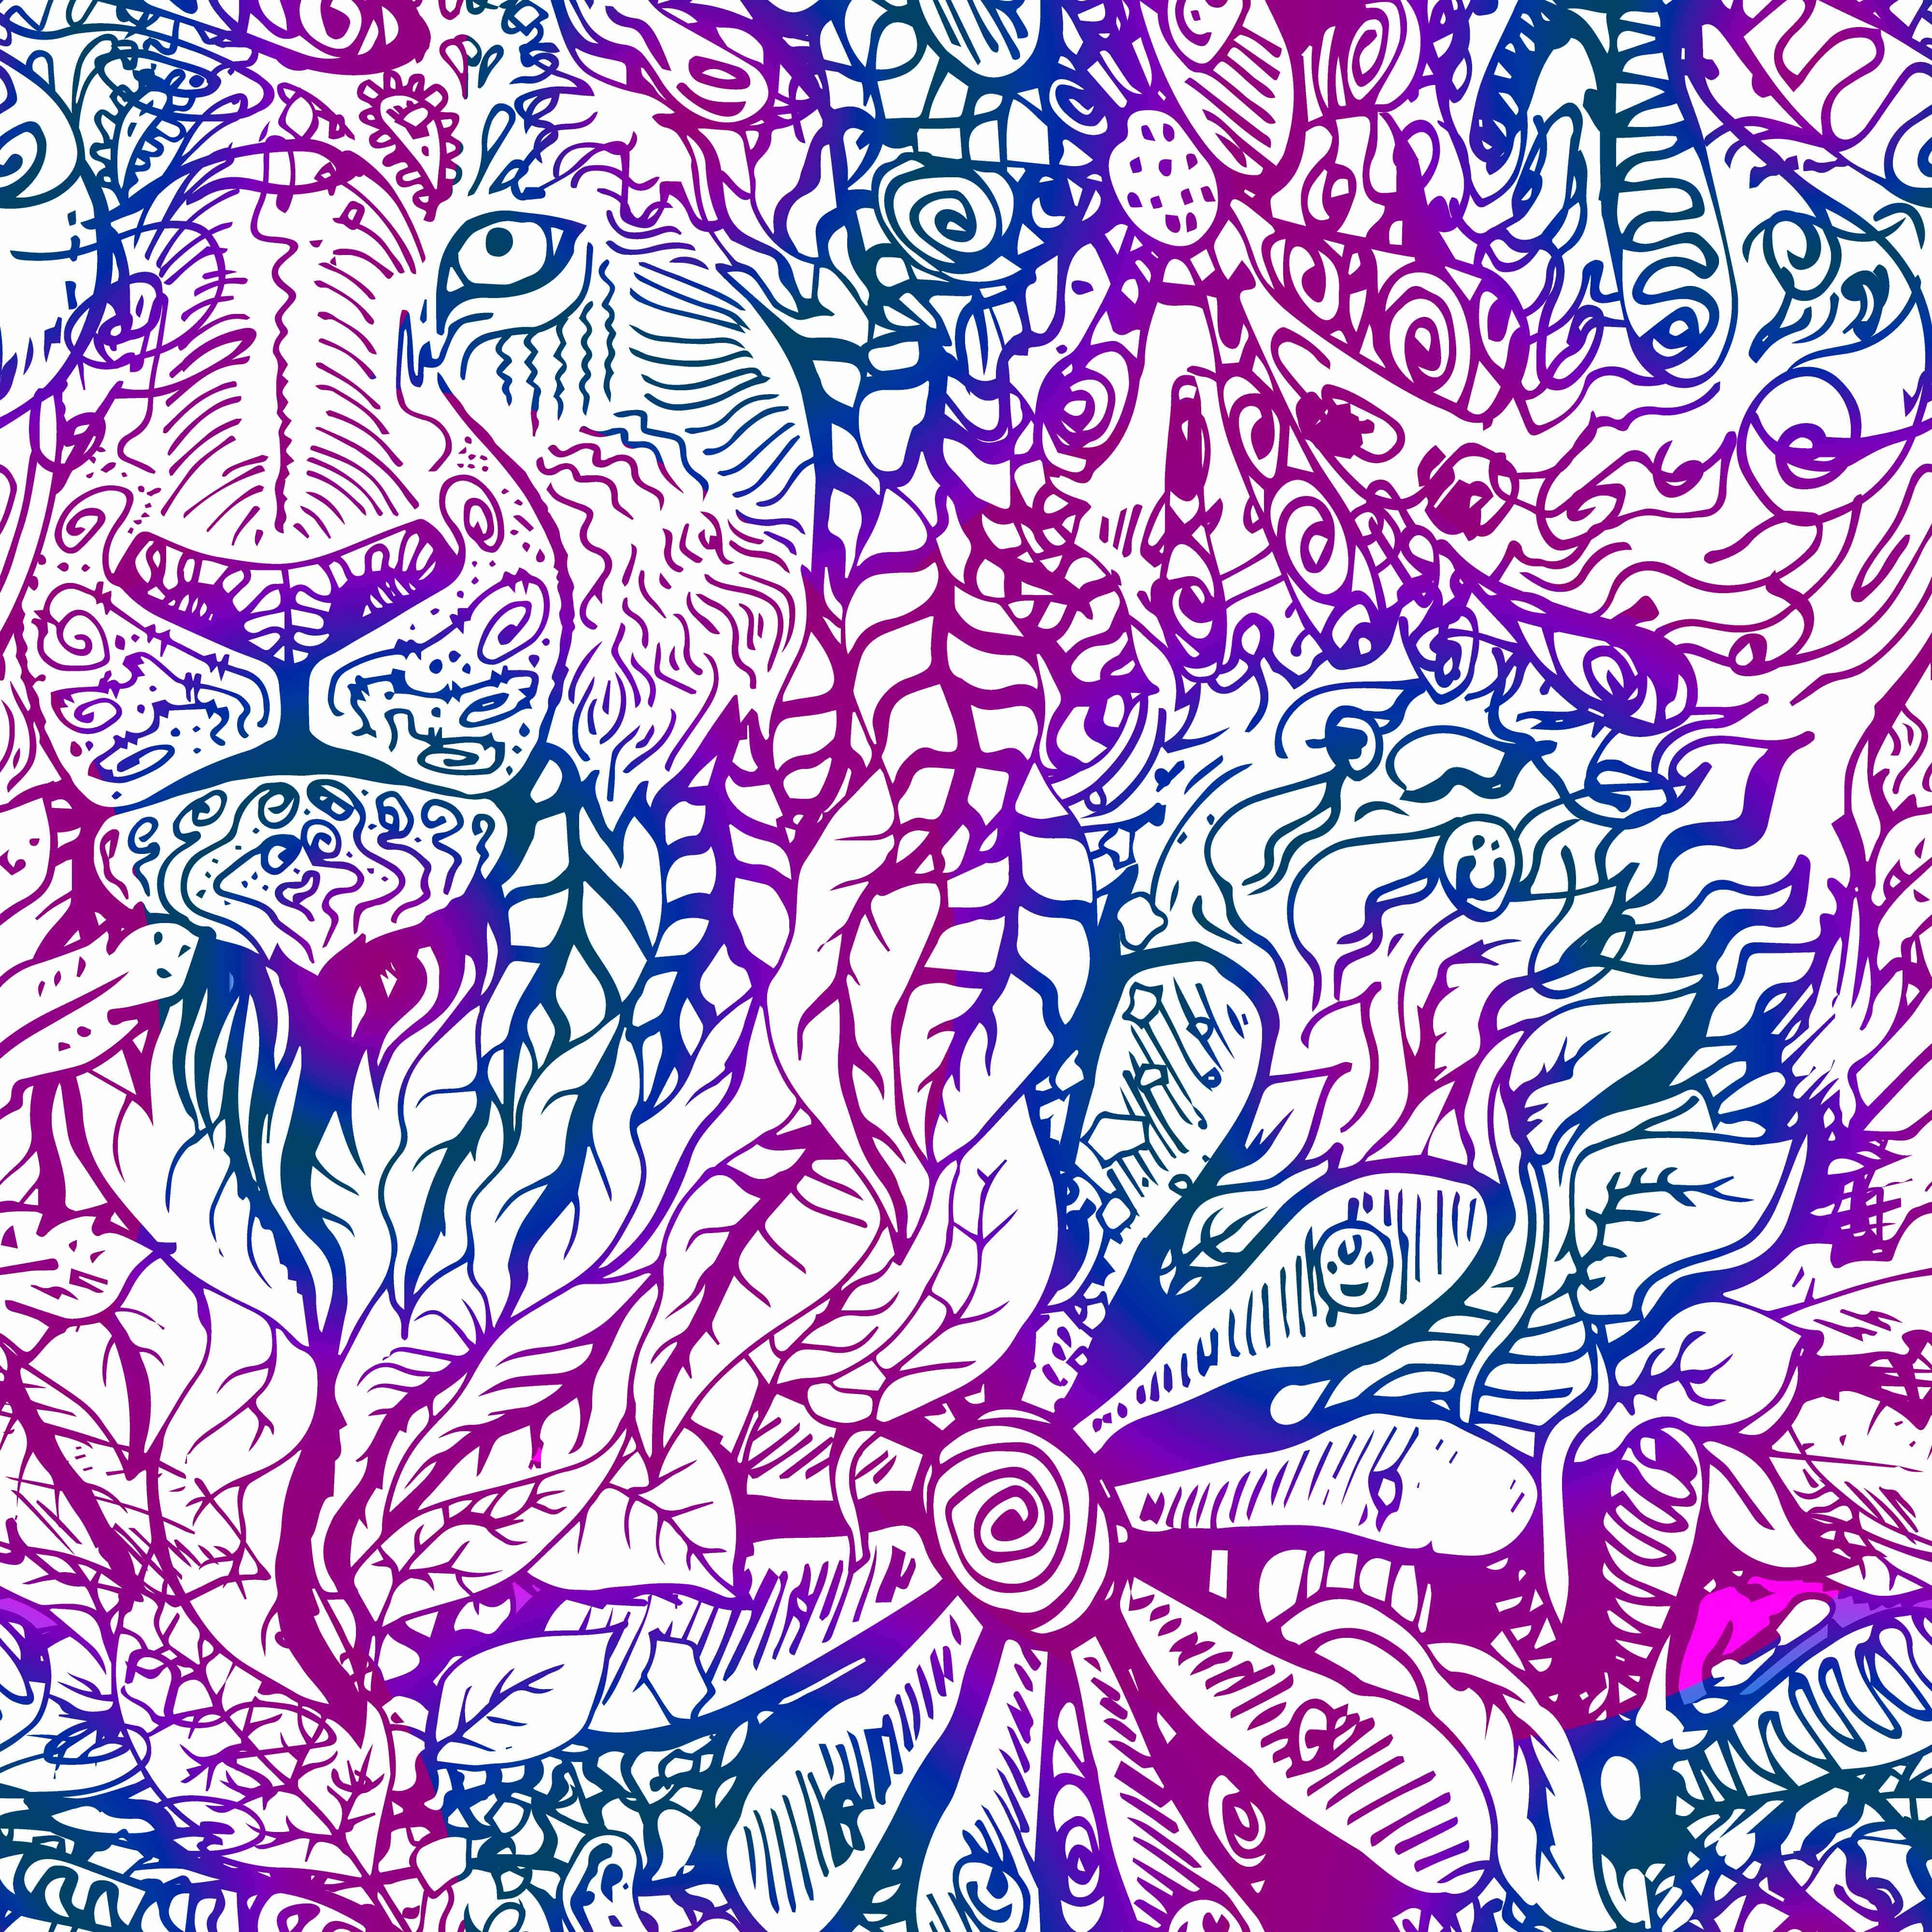 A coloring book image. Coloring is a way to relax and a way to relax your mind